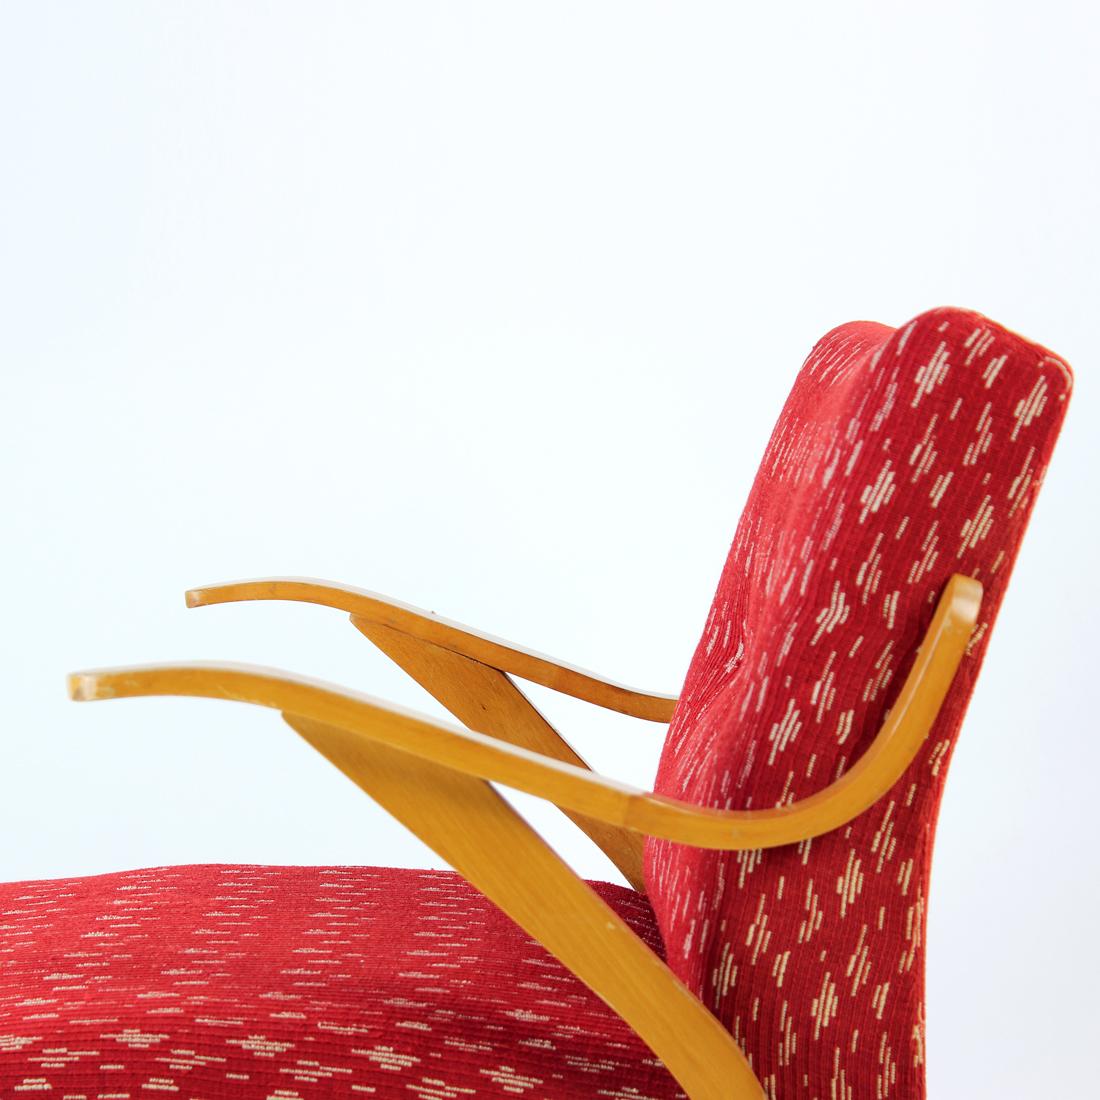 Midcentury Armchair in Original Red Fabric & Blonde Wood, Czechoslovakia, 1960s For Sale 2